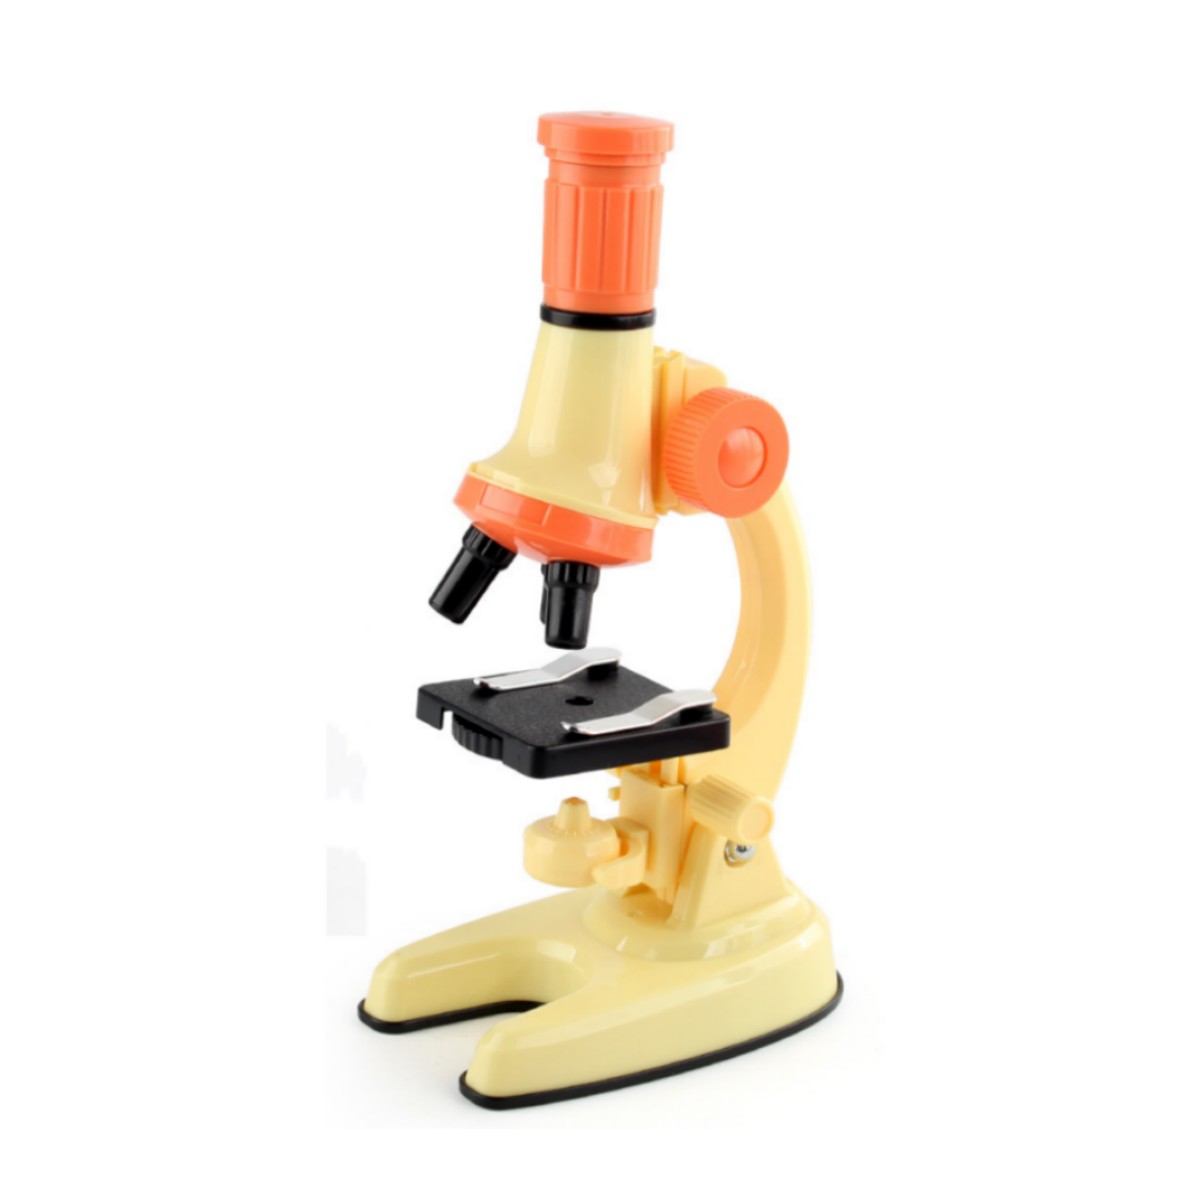 Children Microscope Toys School Biology Lab Science Experiment Kit Education Scientific Toys For Boys Girls